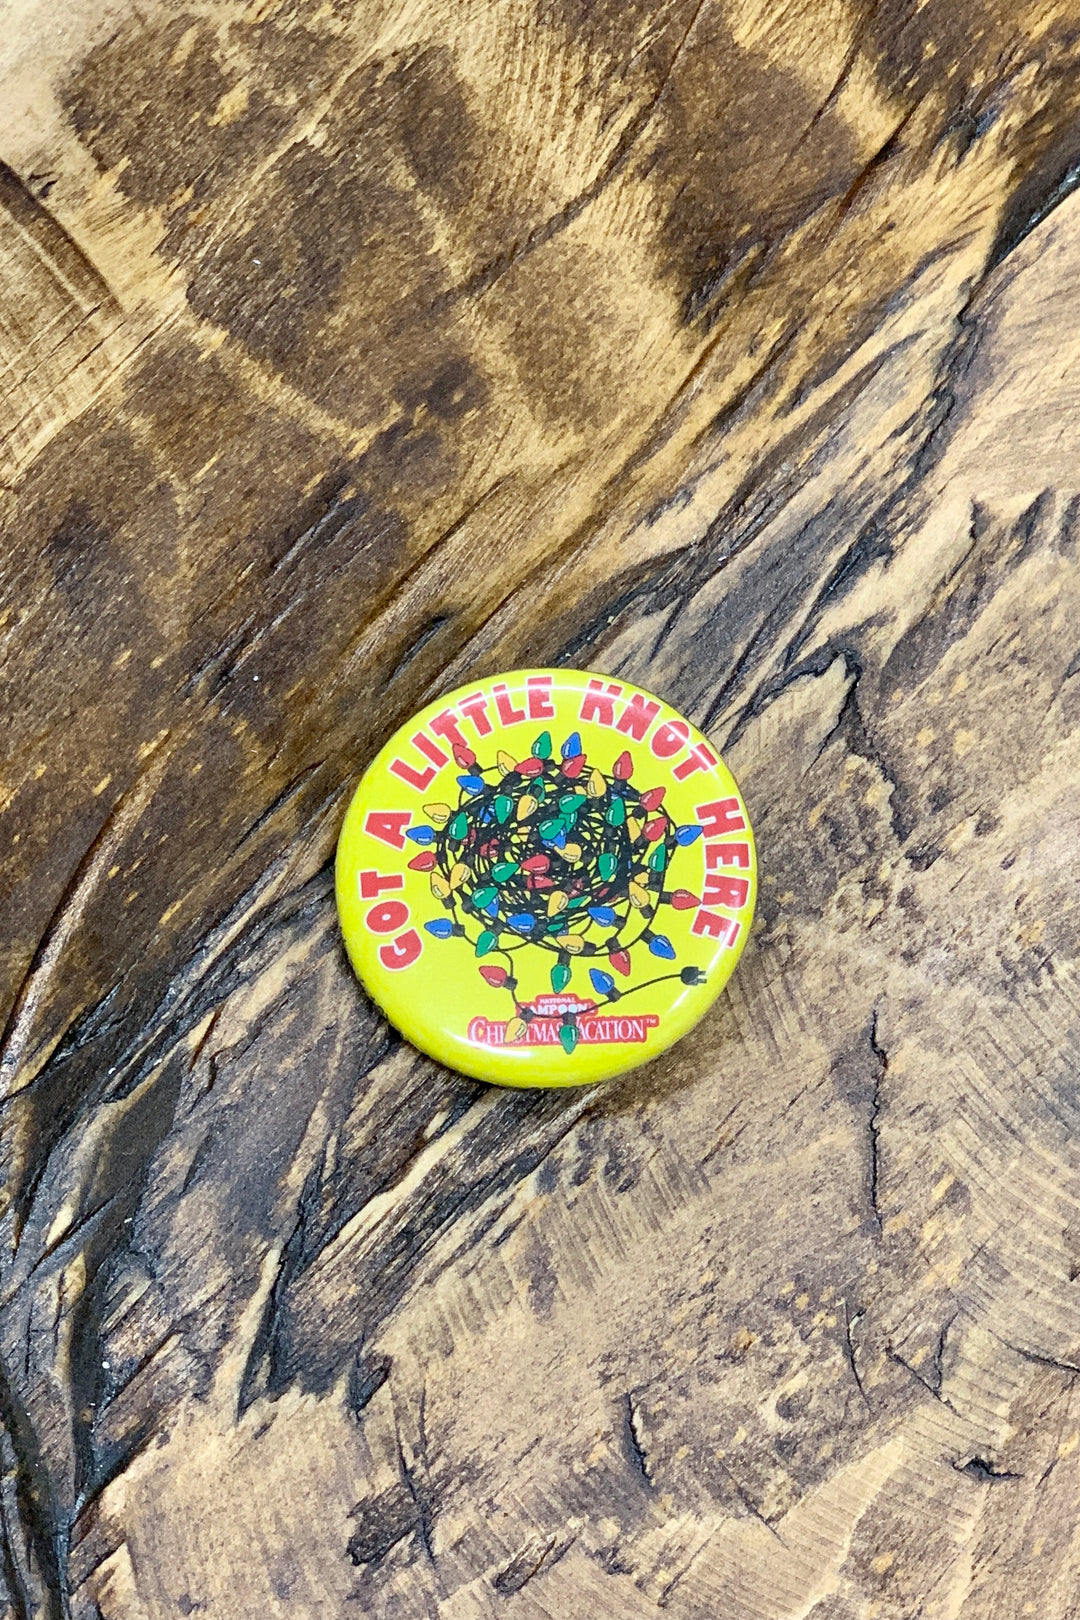 National Lampoon’s Christmas Vacation Buttons